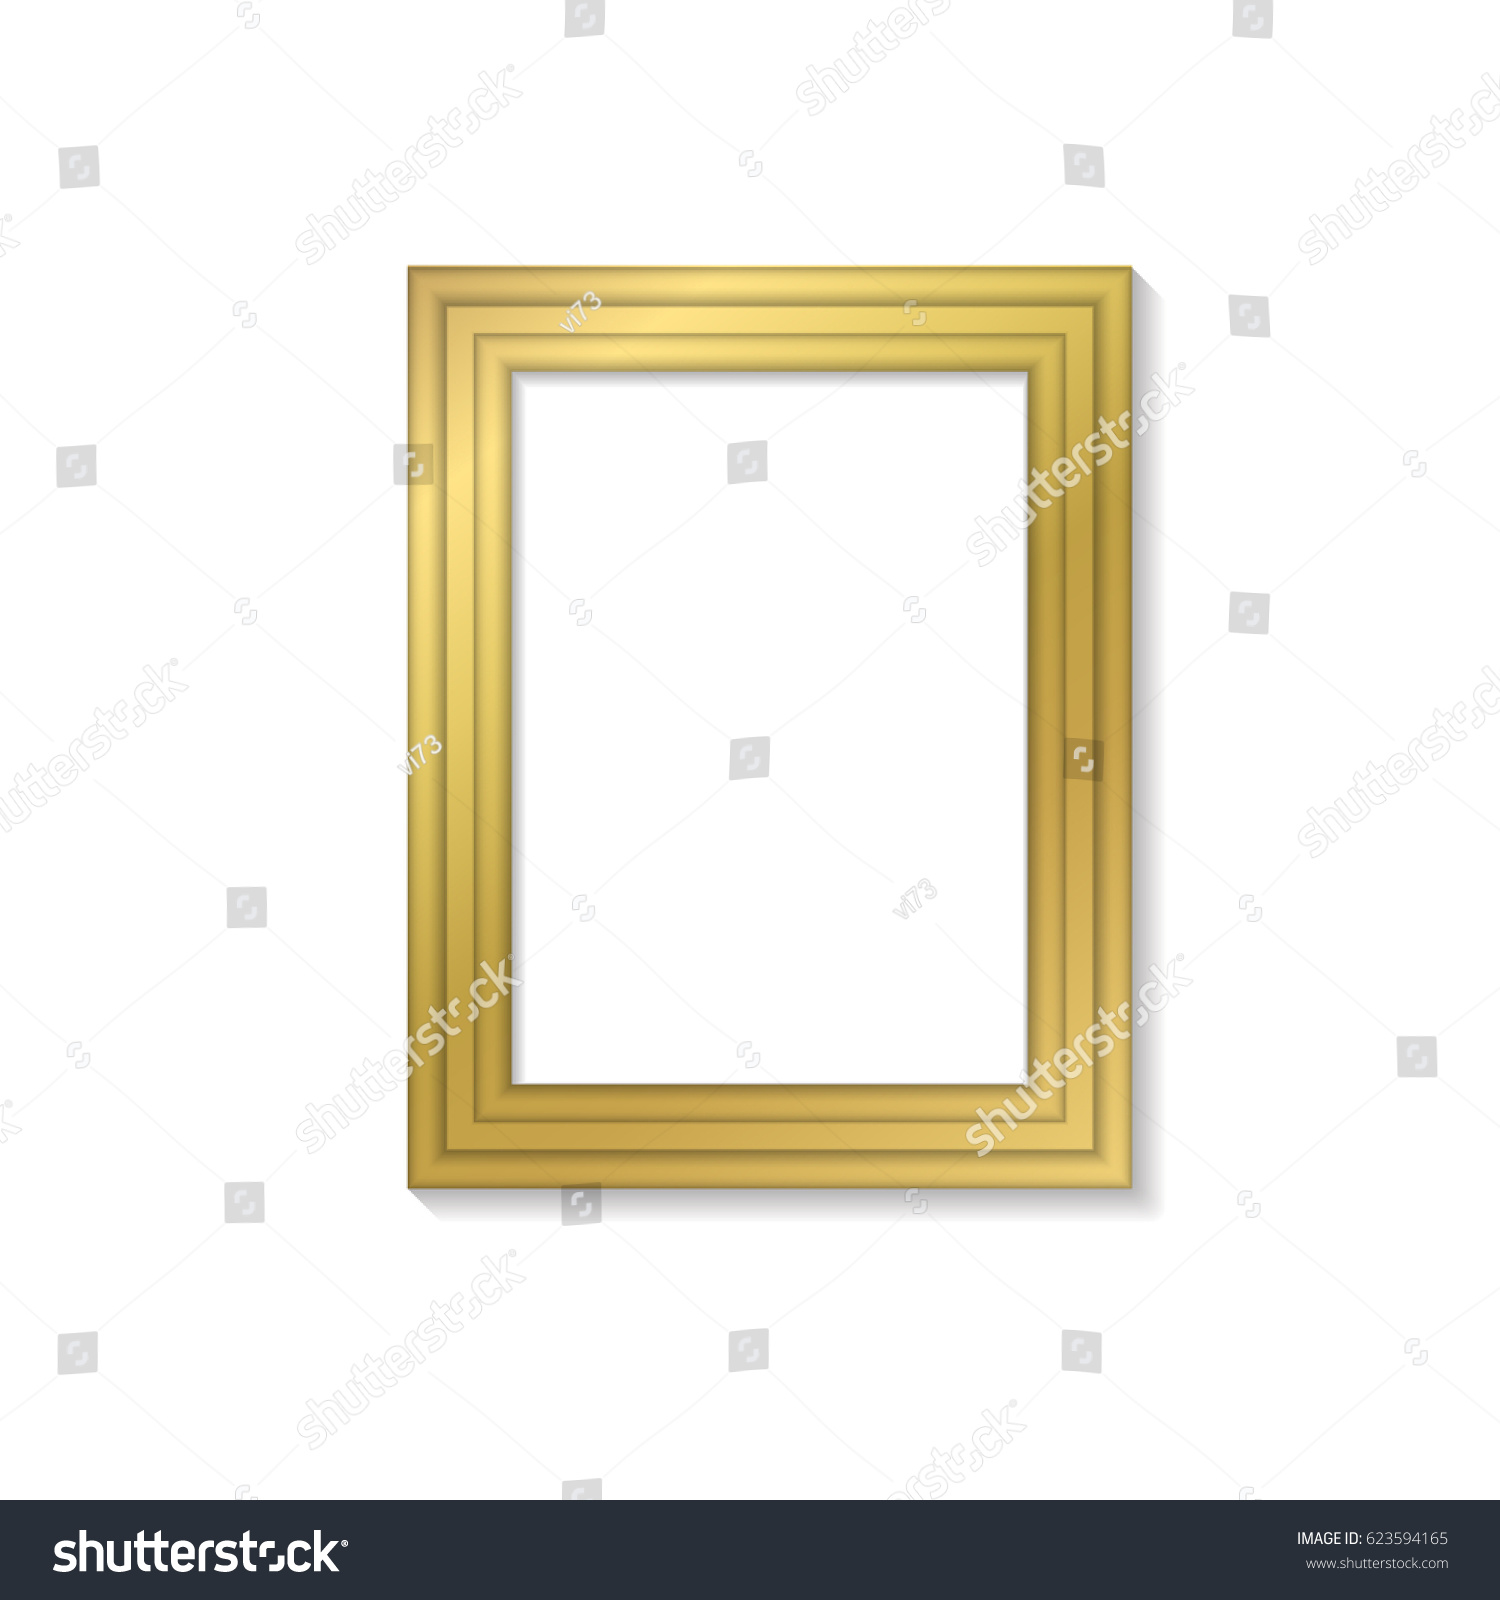 Blank Golden Frame Template Pictures Photos Stock Vector (Royalty Free ...